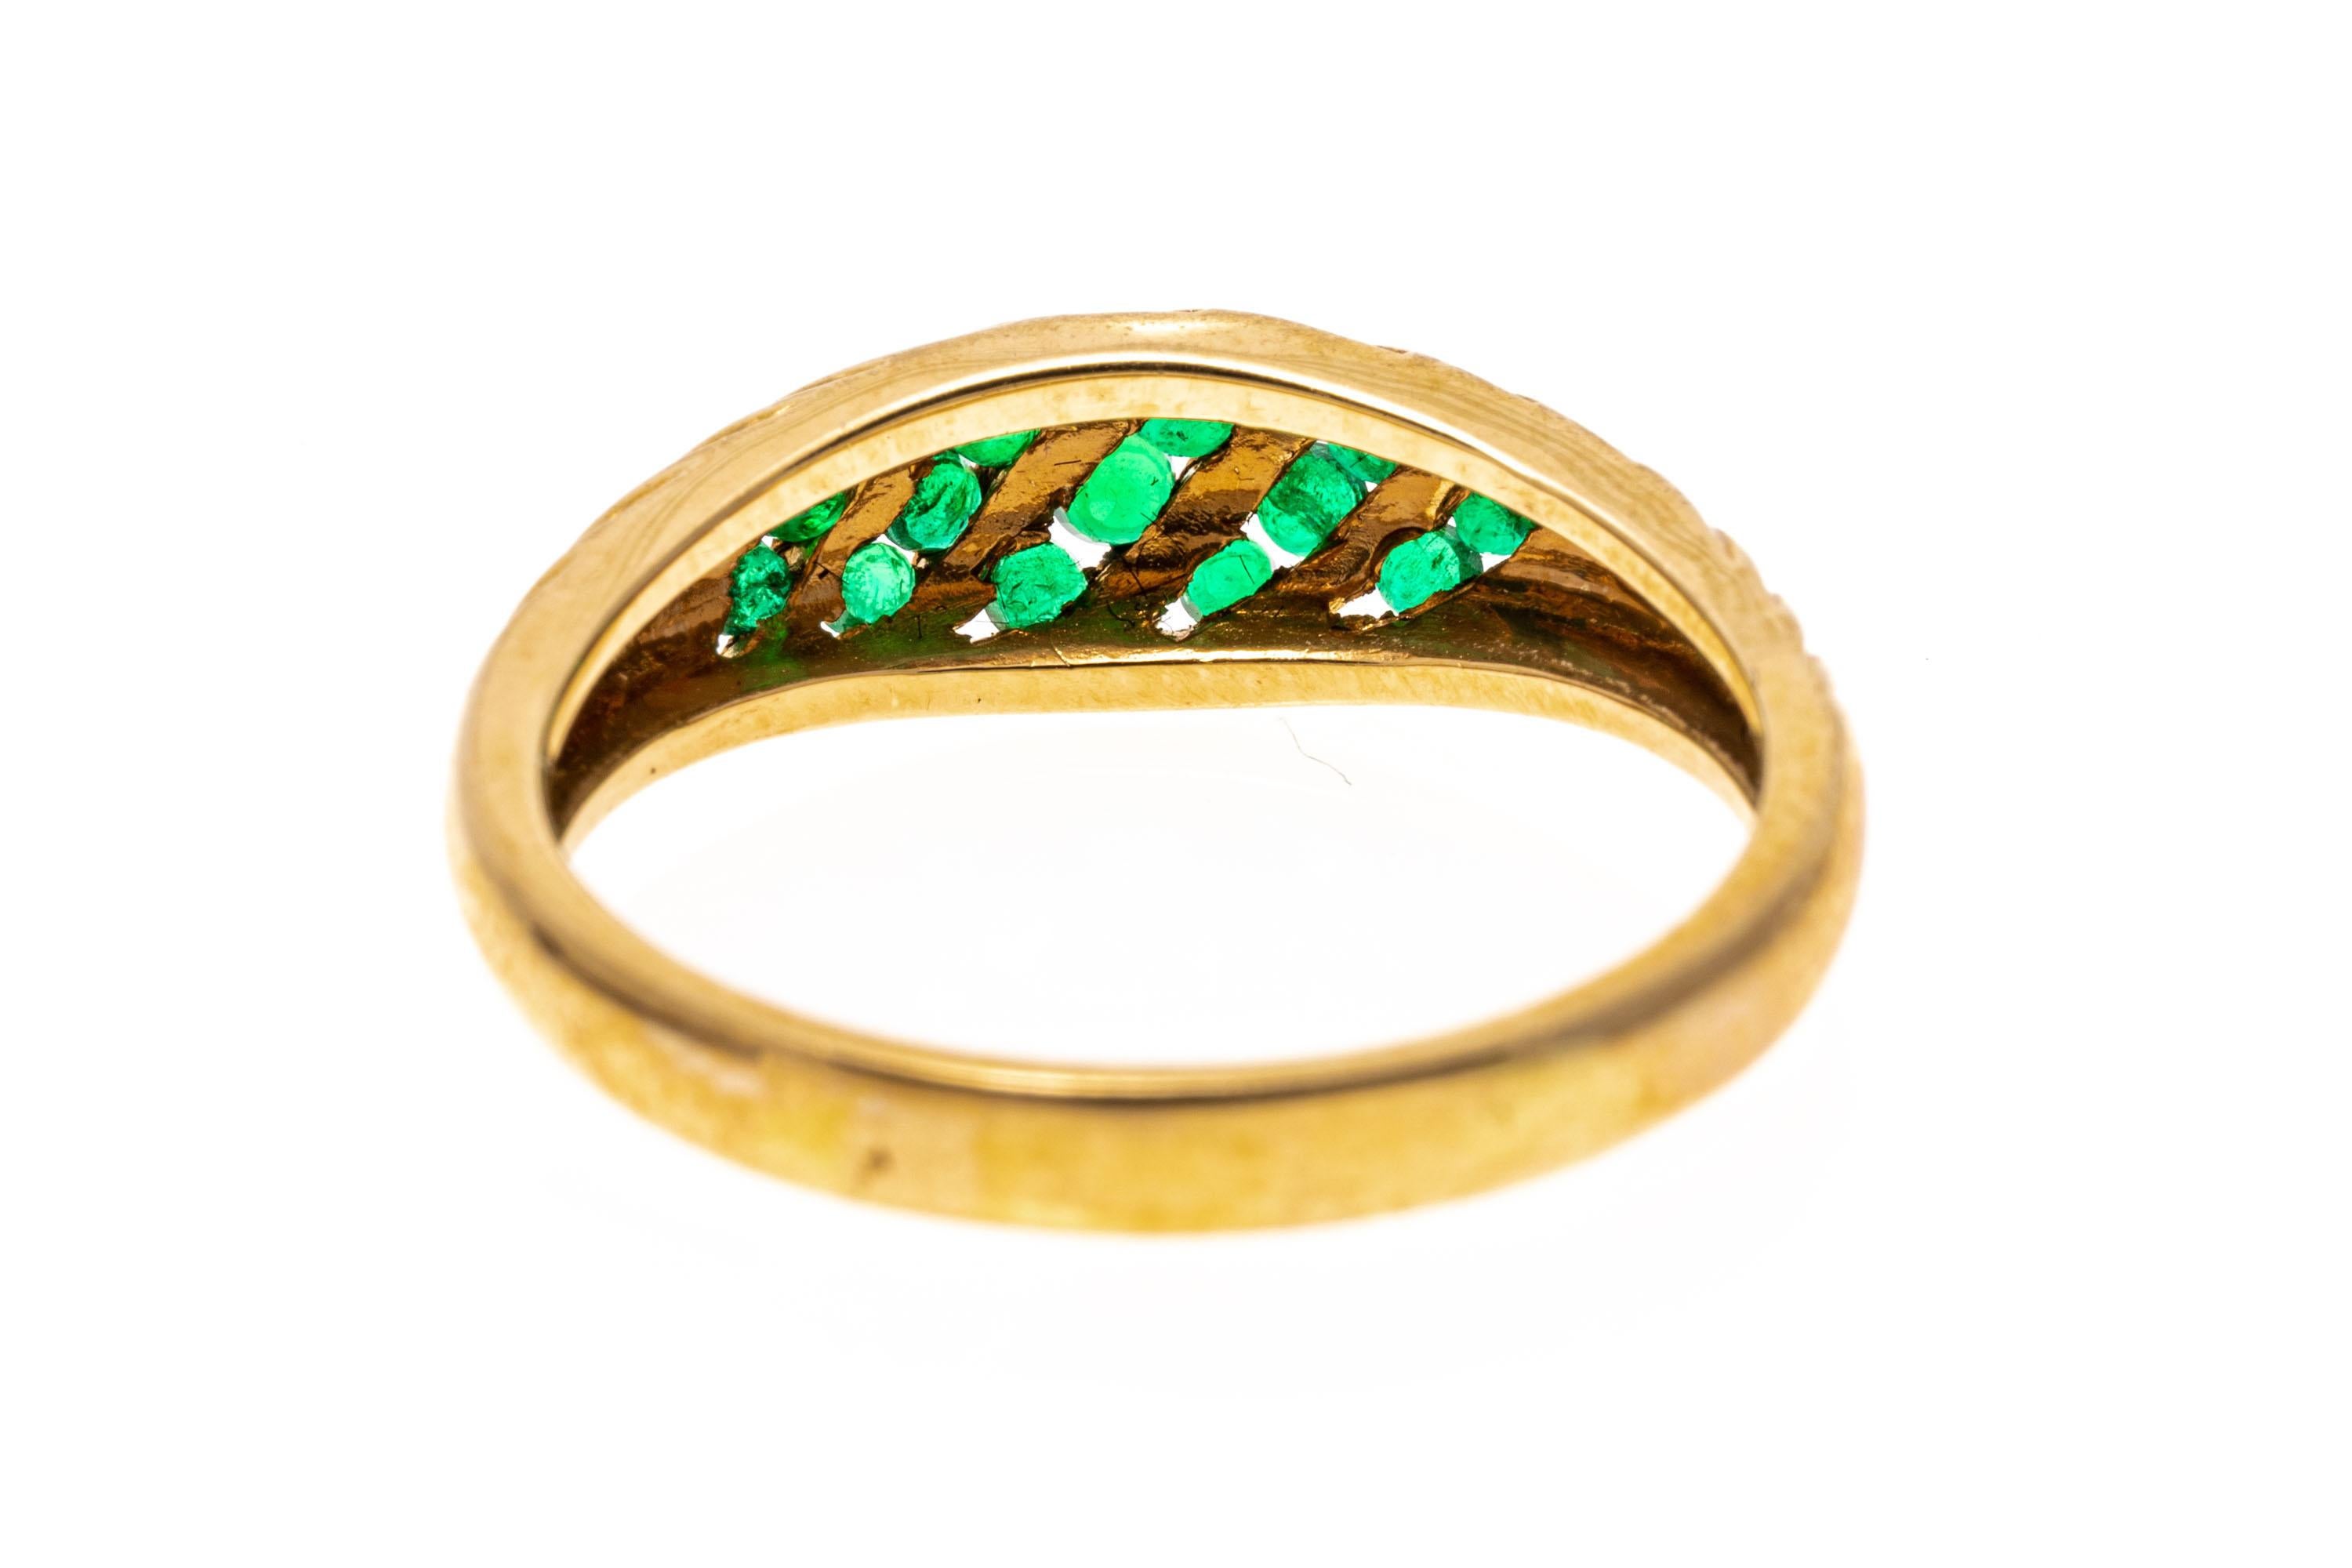 14k yellow gold ring. This pretty ring is a ribbed, domed style, with an angled, channel set center cluster of round faceted, medium green color emeralds, approximately 0.40 TCW.
Marks: 14k
Dimensions: 1/2